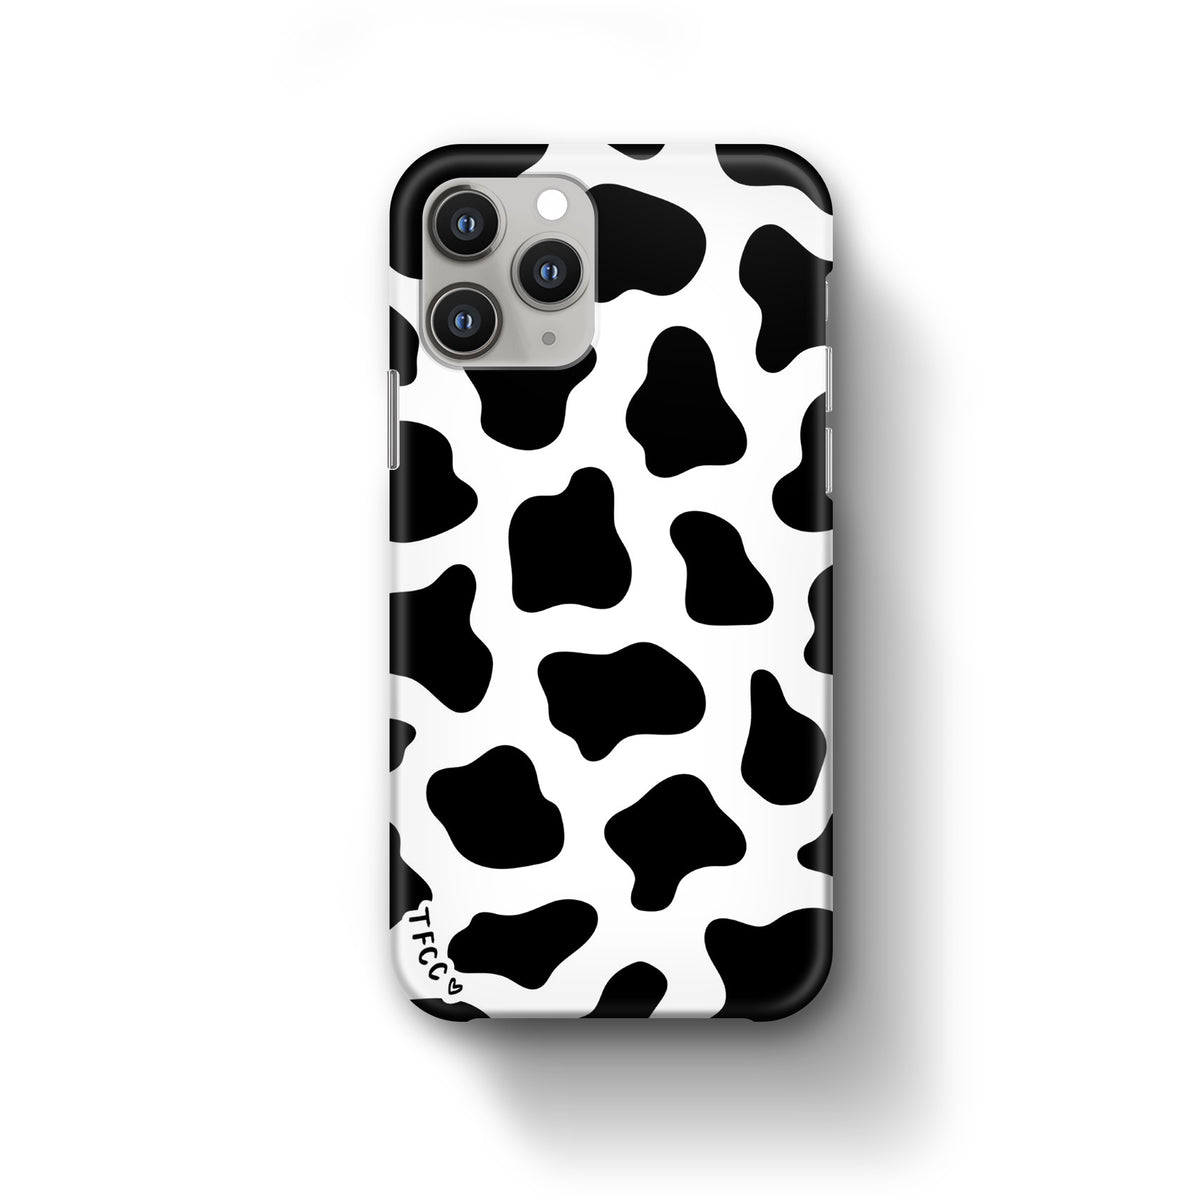 COW PRINT CASE - thefonecasecompany